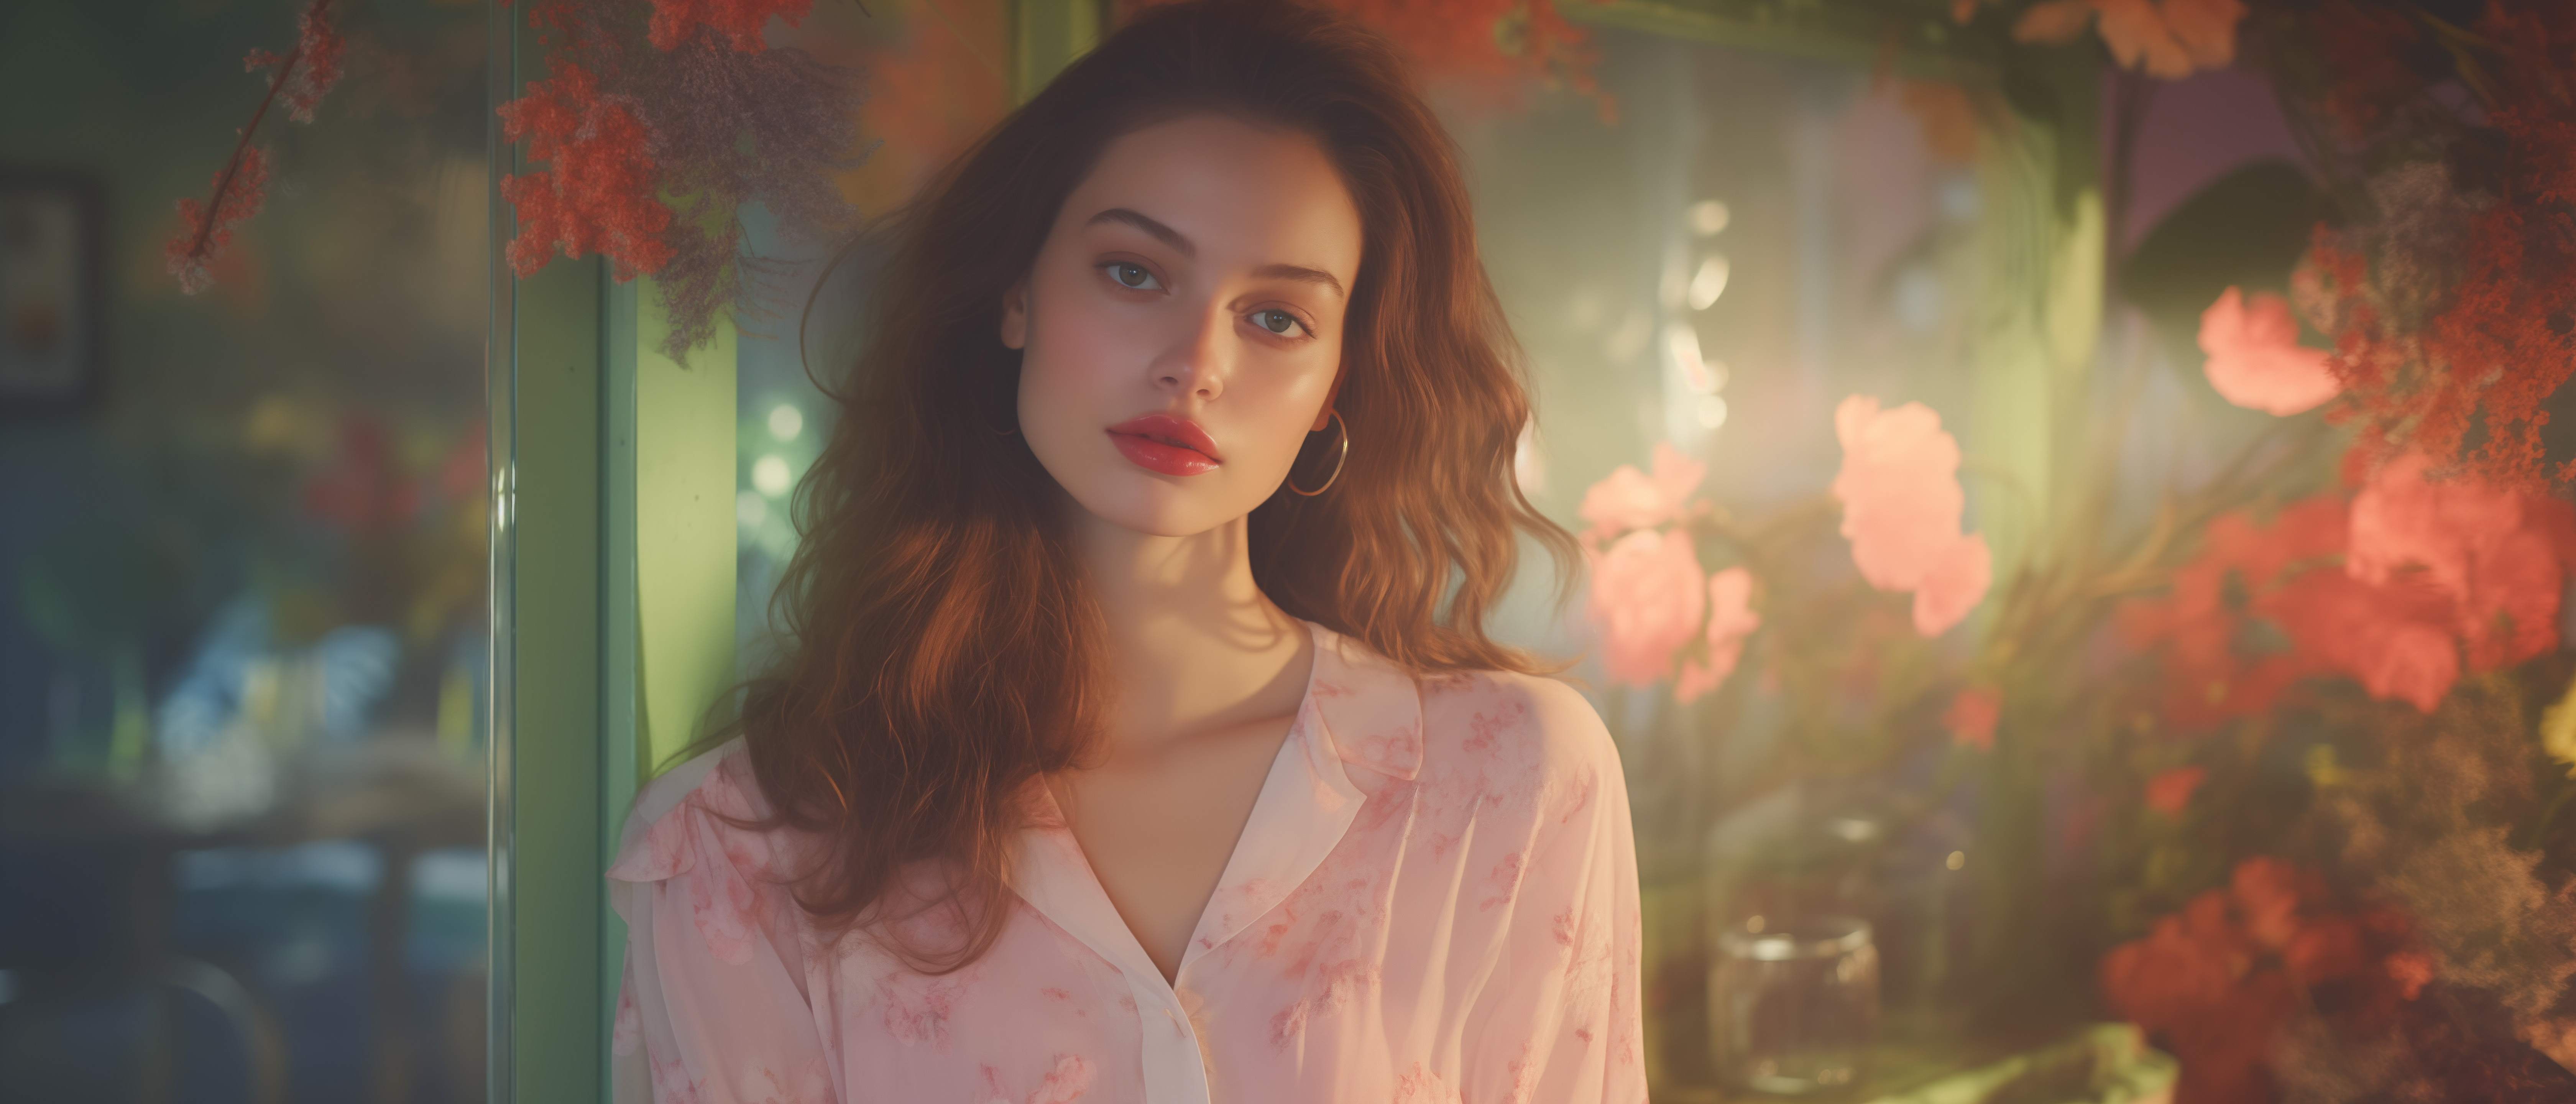 A woman stands framed by vibrant flowers, her serene expression illuminated by a rich tapestry of sunset colours, conveying a painterly, soft-focus realism that highlights the interplay of light and shadow.